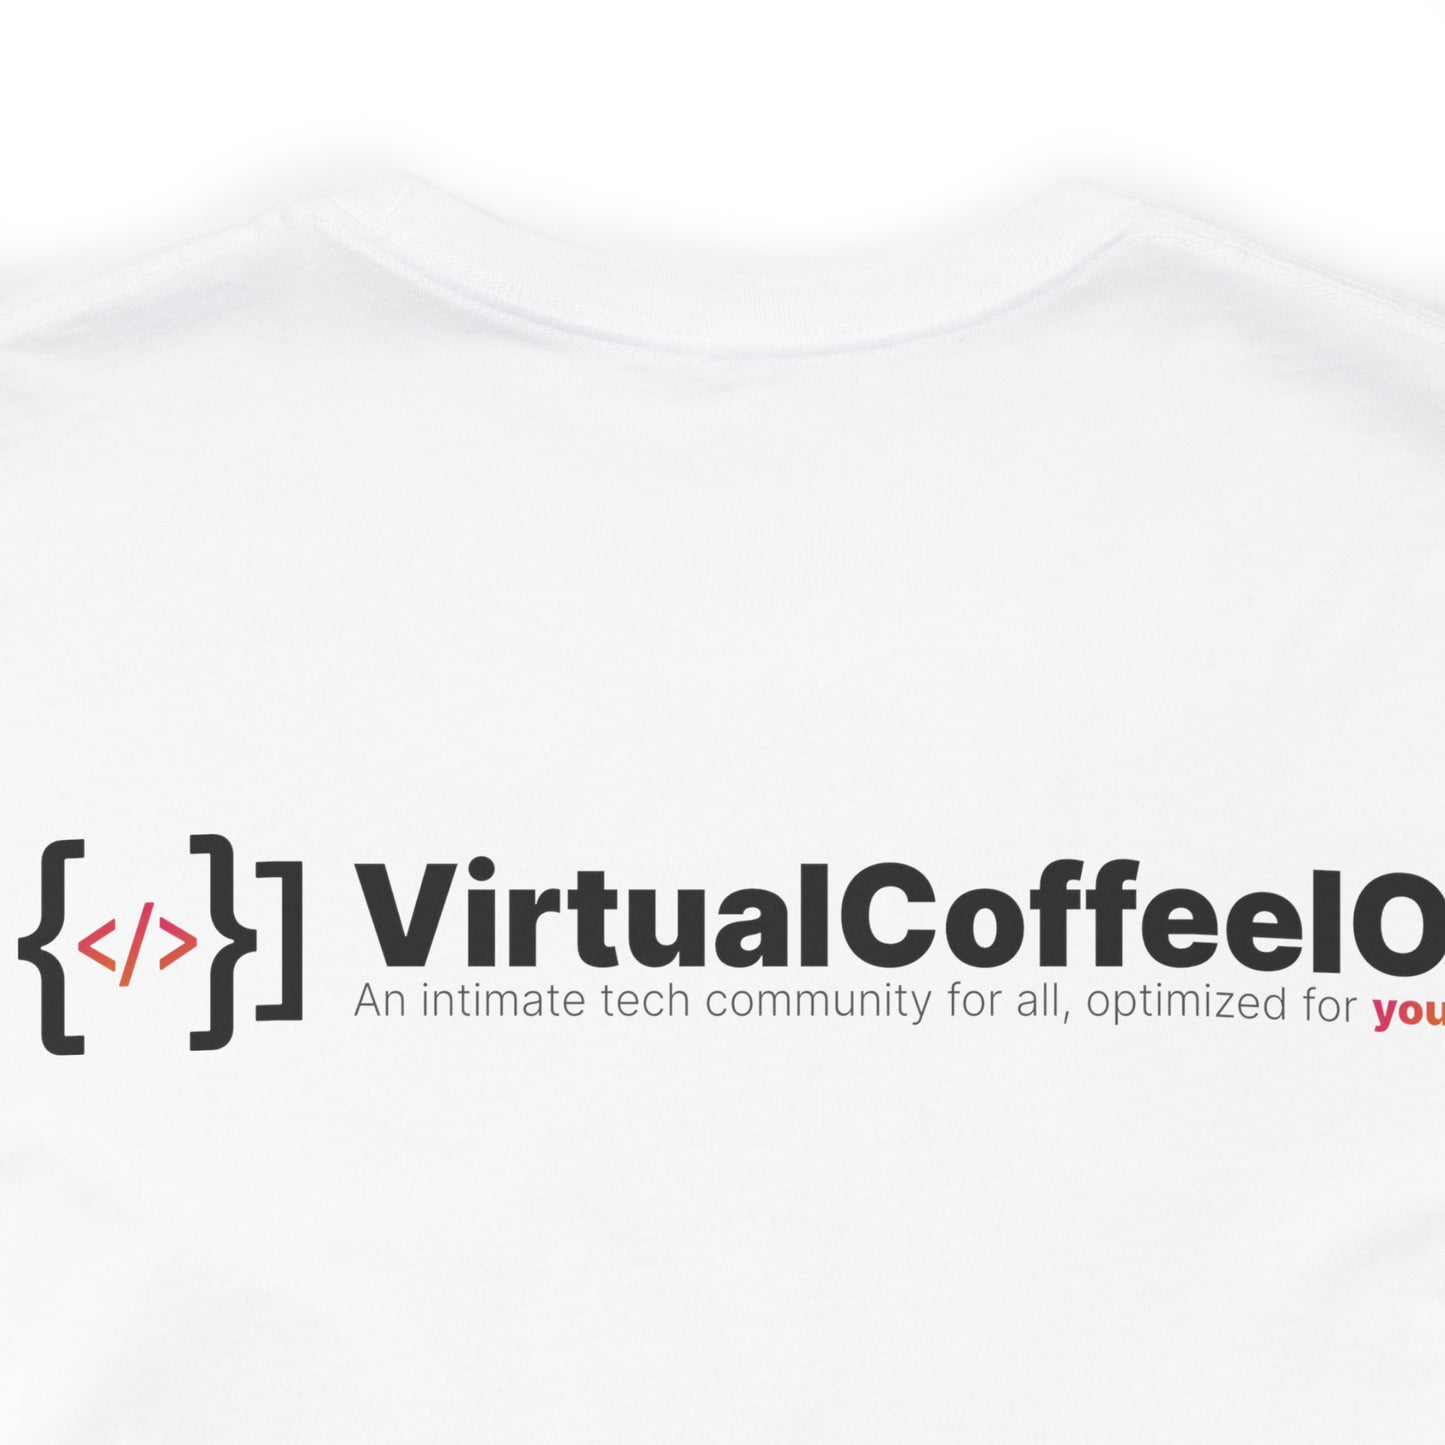 Find me in #co-working-room T-Shirt